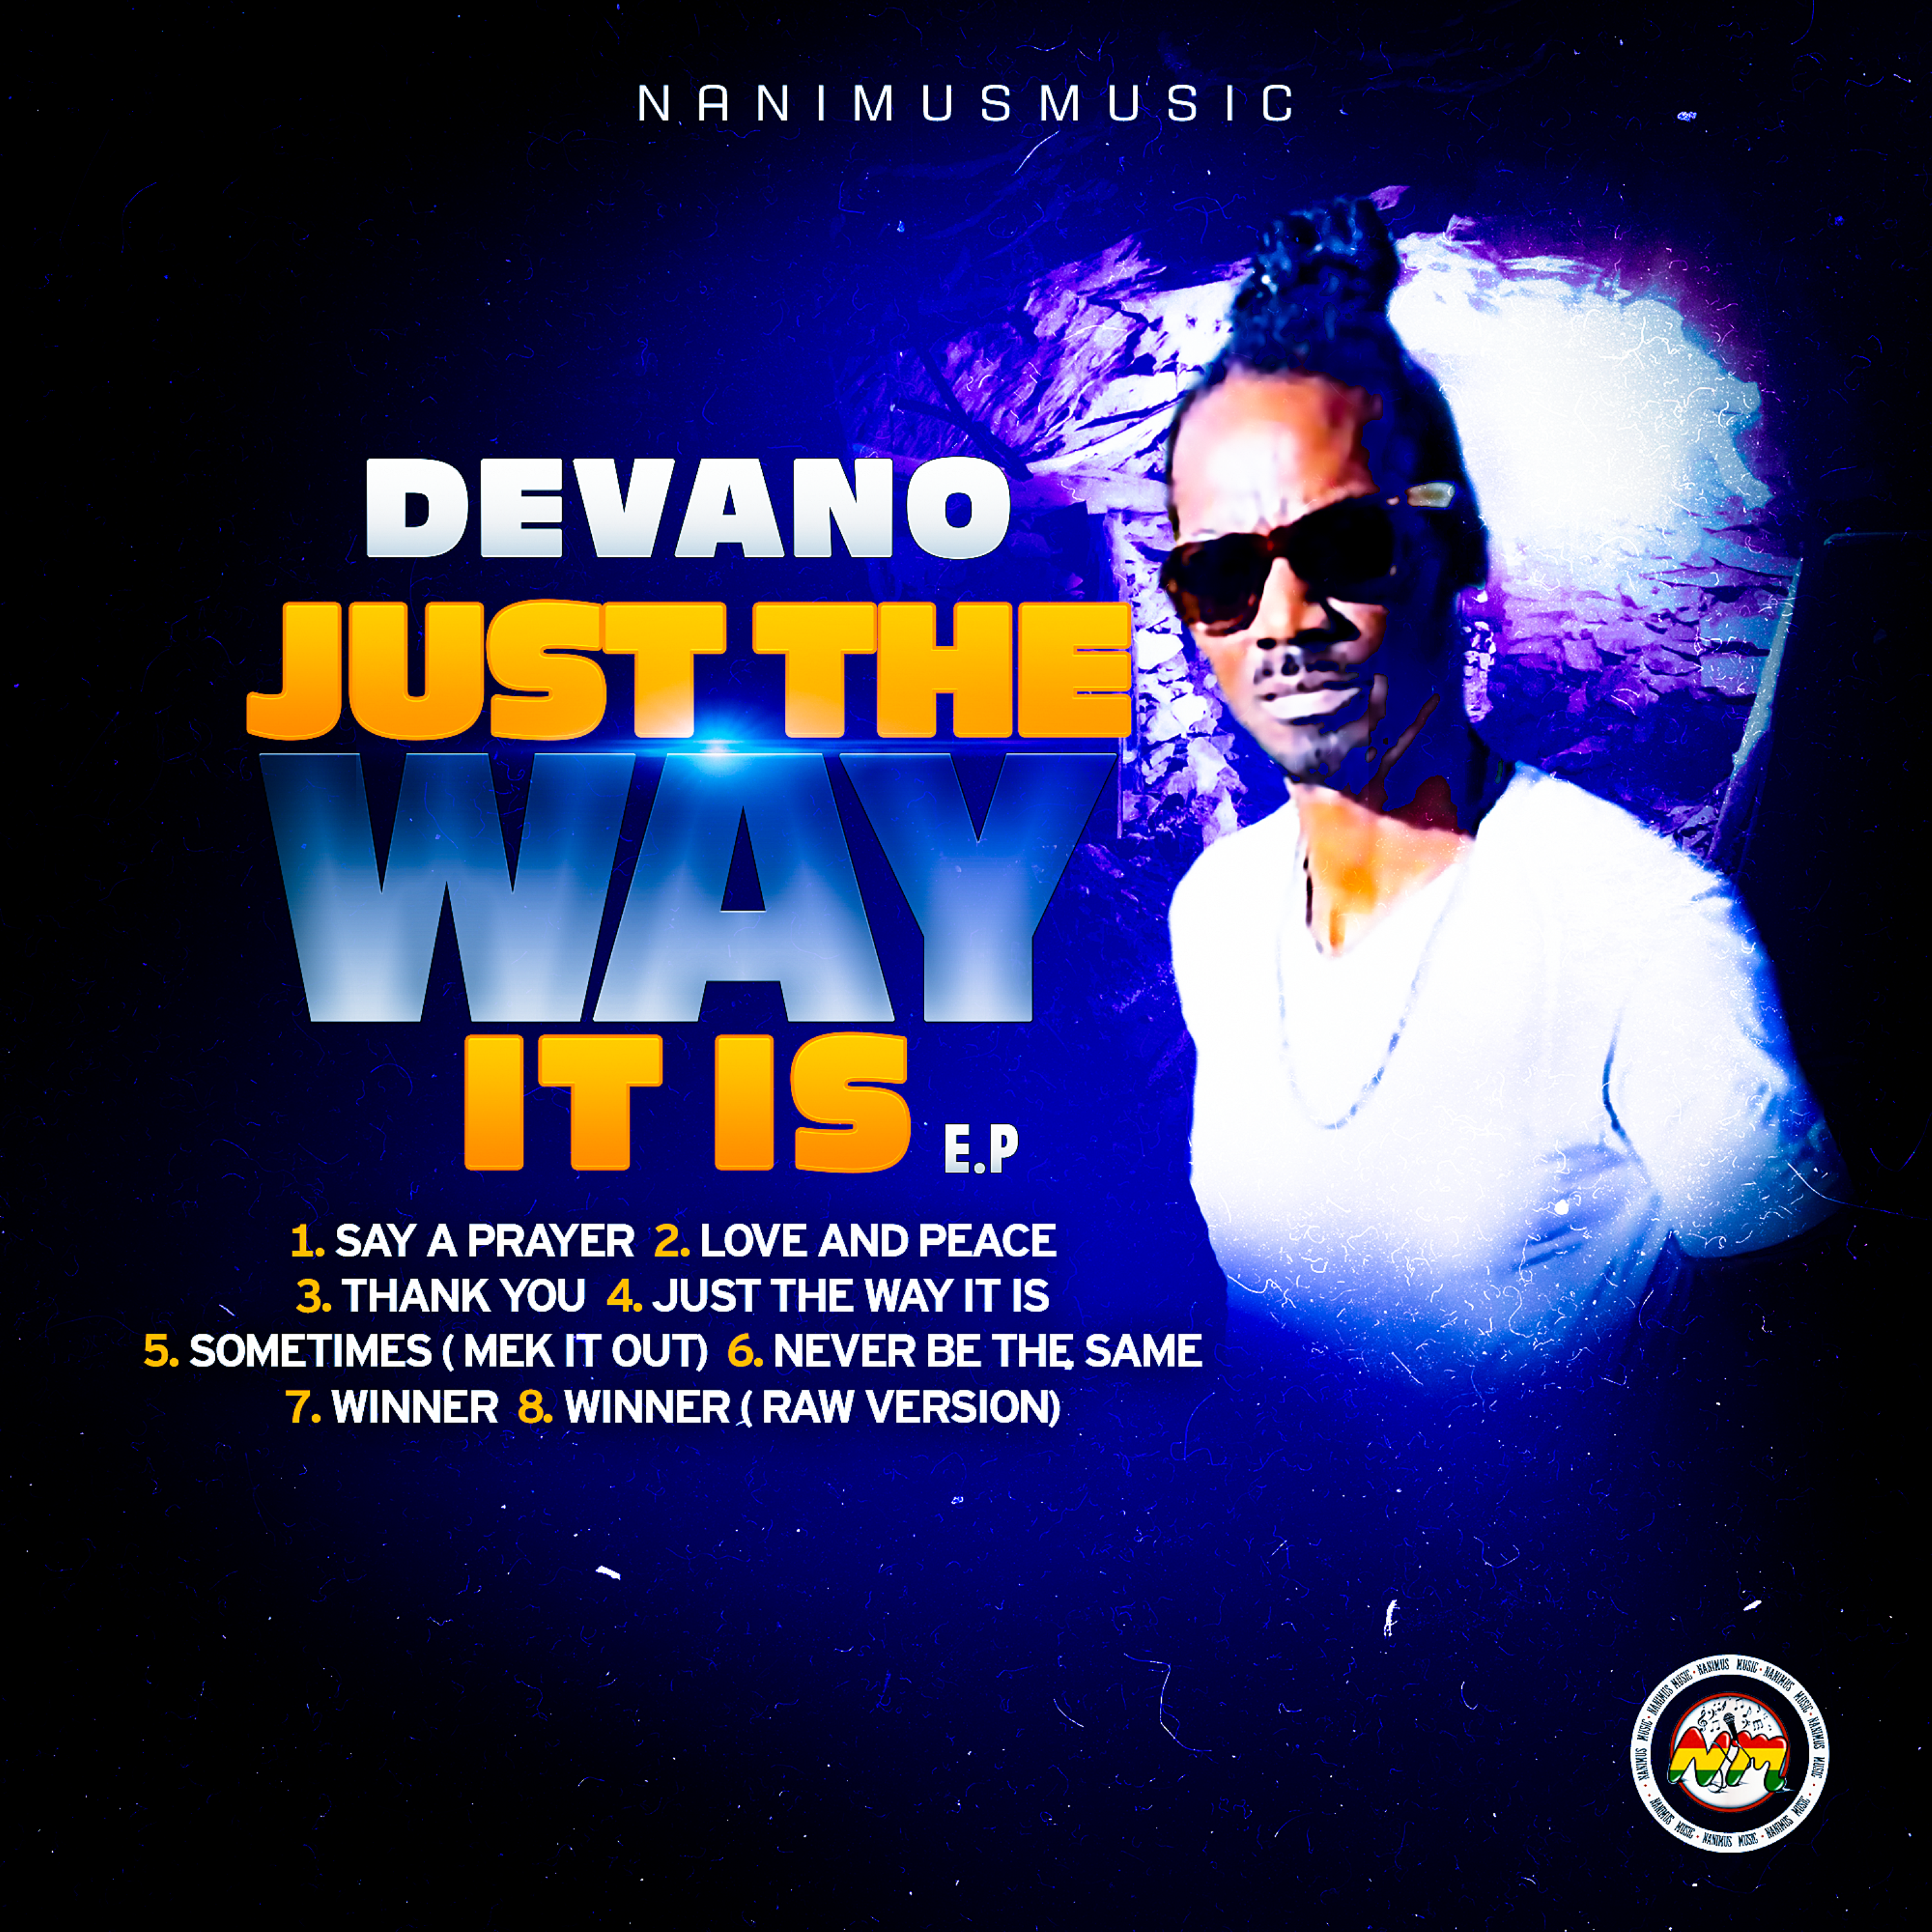 Davano - Just the way it is EP 3BY 3